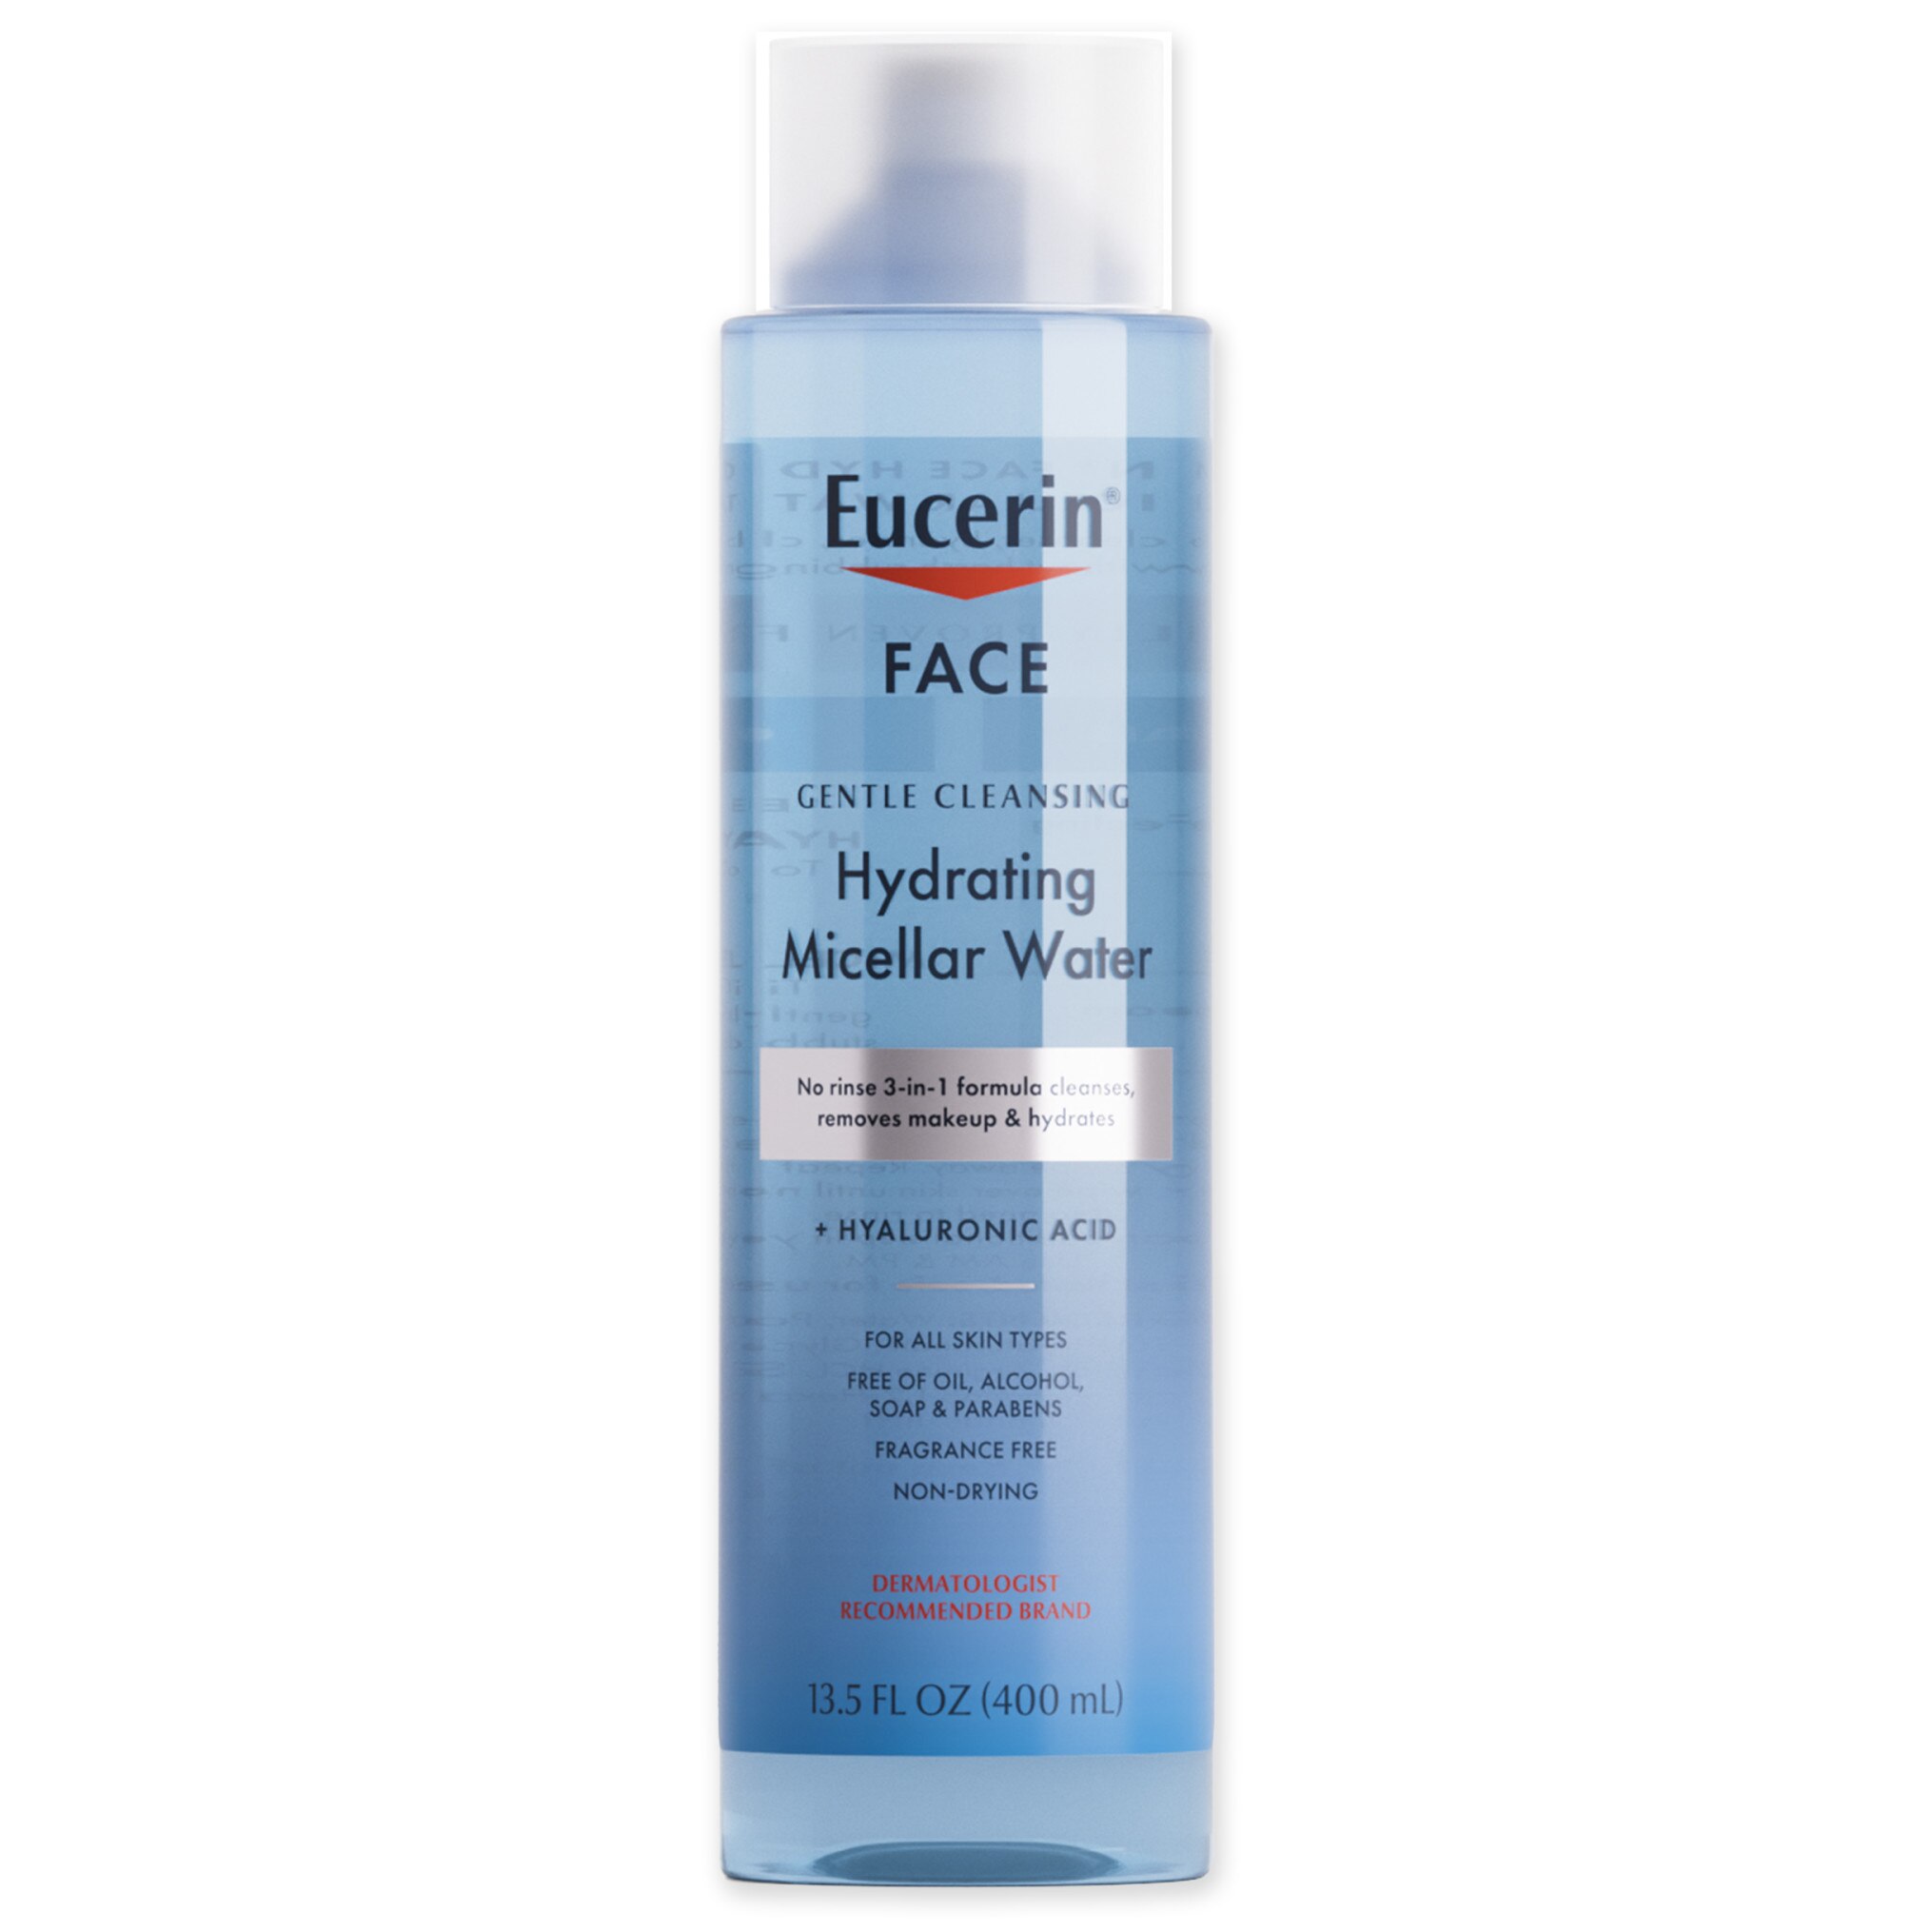 Eucerin Face Gentle Cleansing Hydrating Micellar Water, 13.5 - 13.5 Oz , CVS